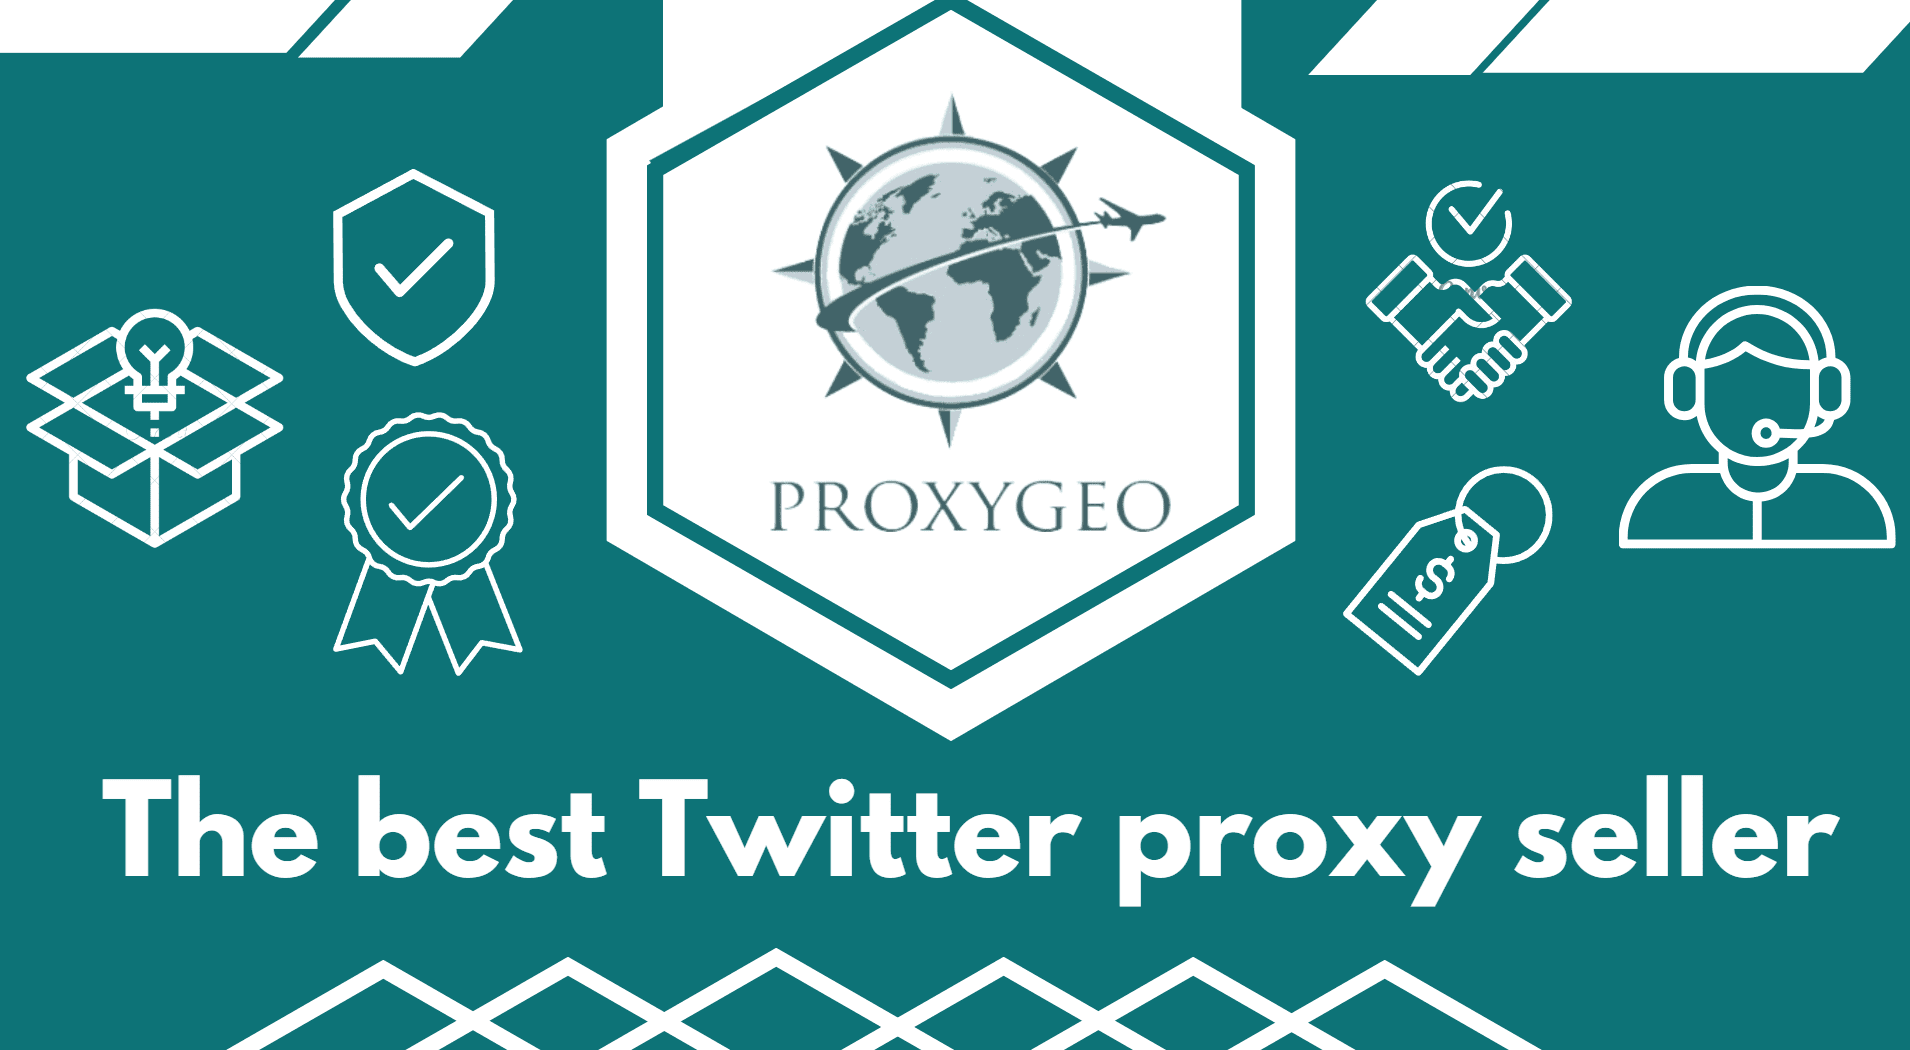 The best site to buy Twitter proxy